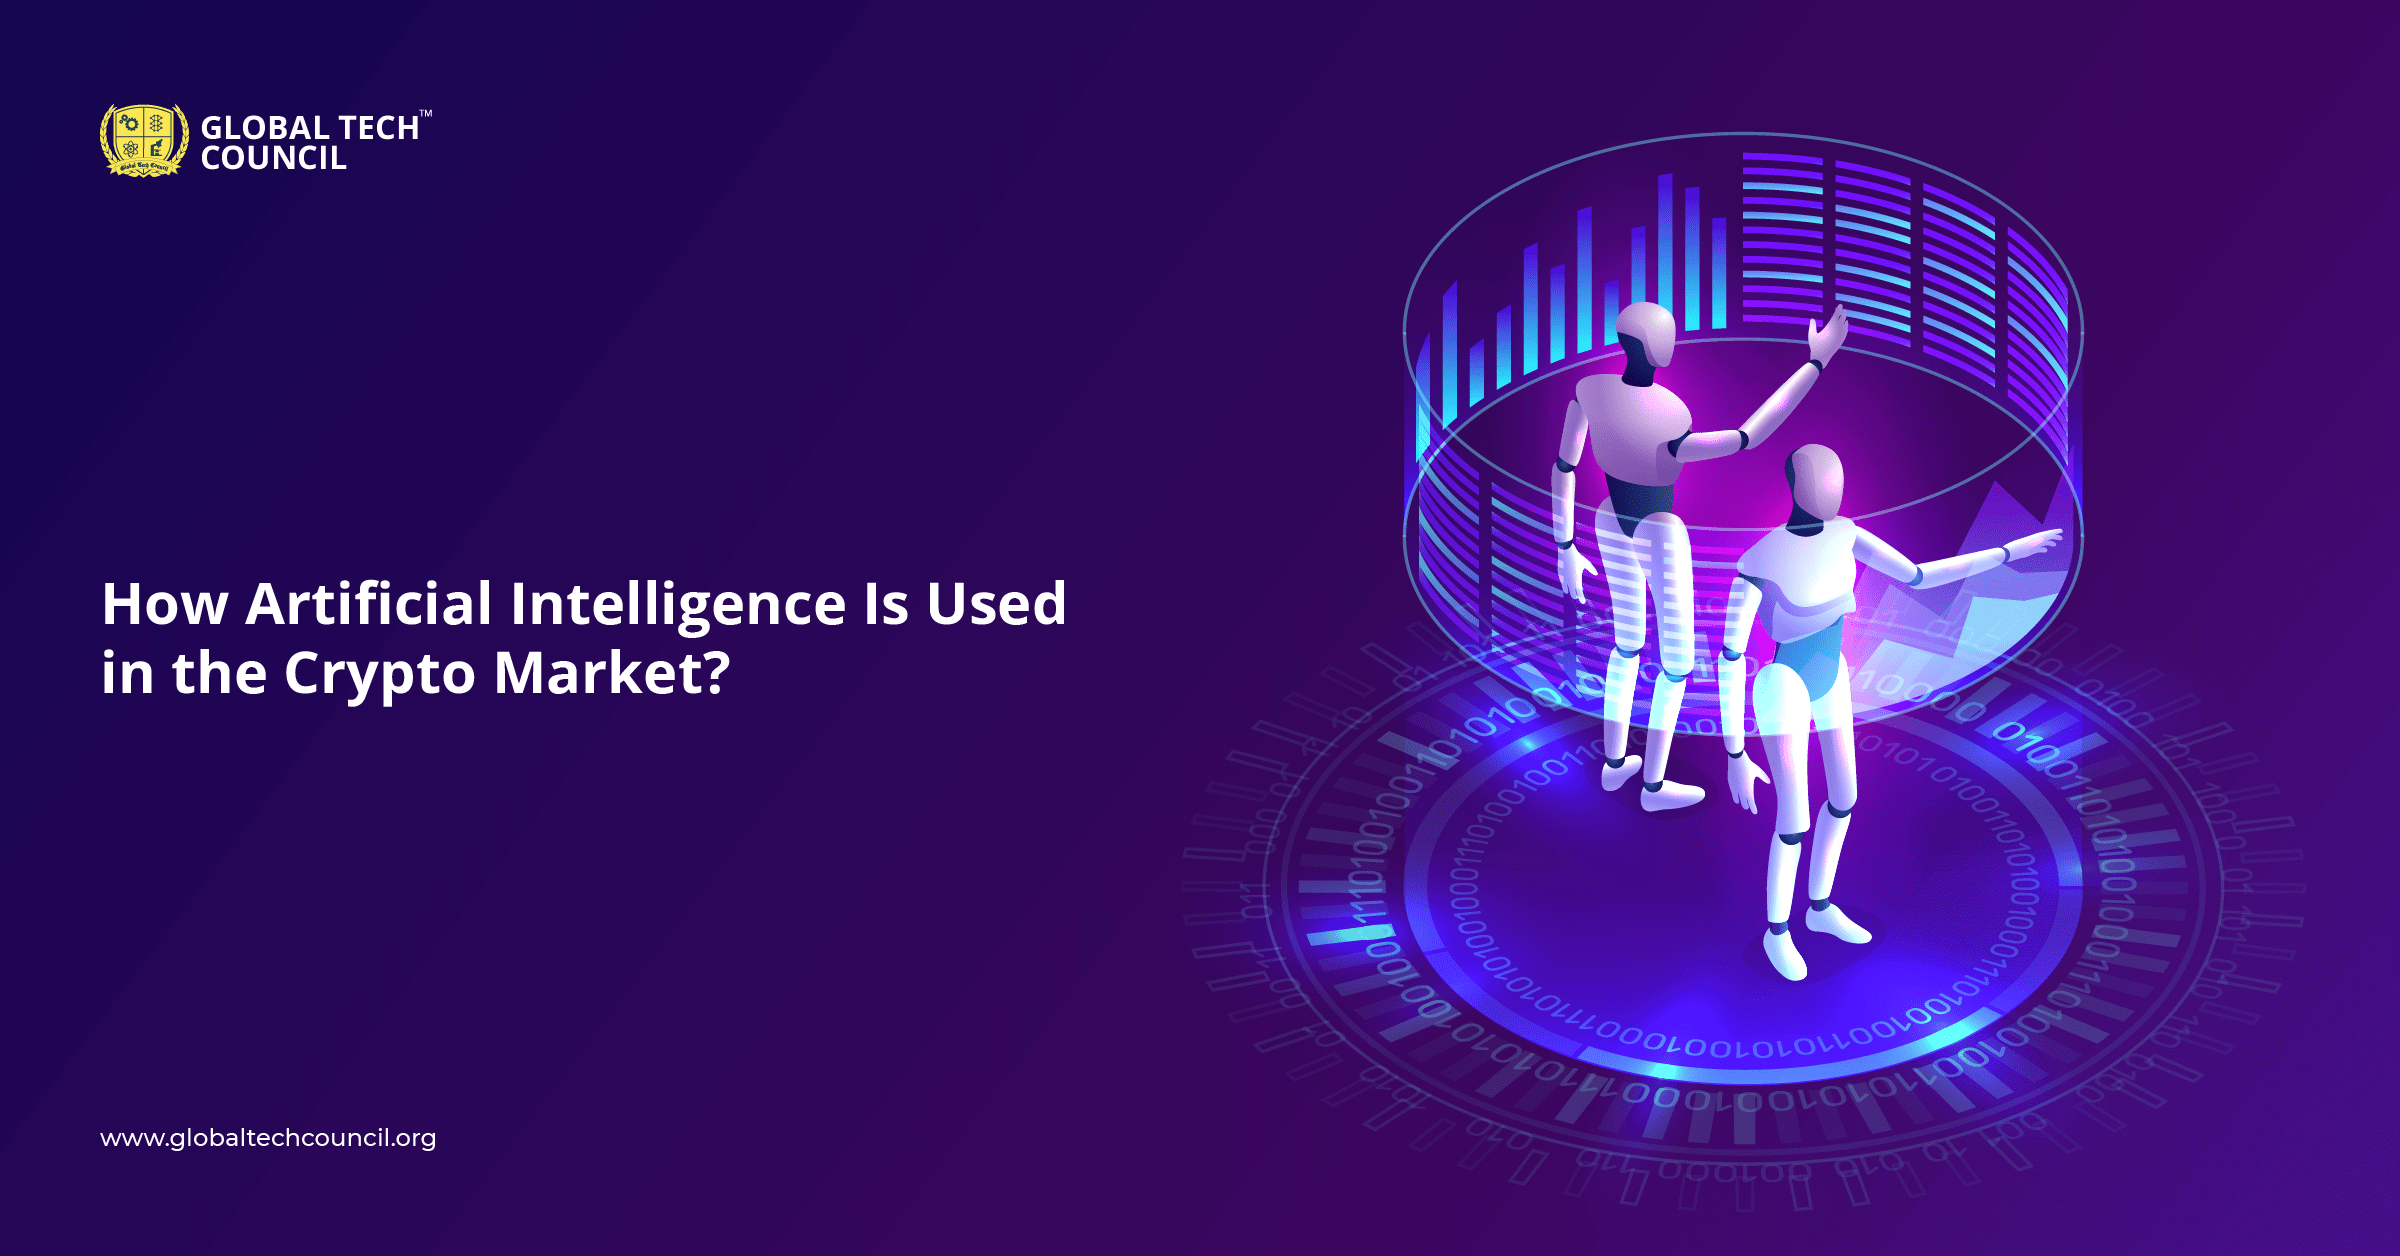 How Artificial Intelligence Is Used in the Crypto Market